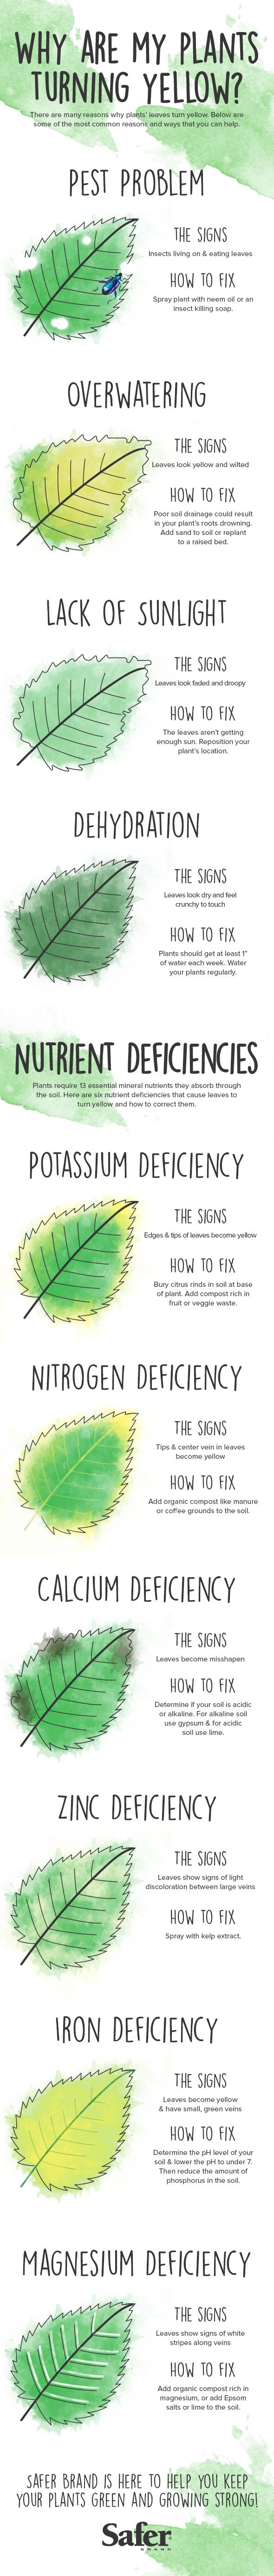 plants turning yellow infographic